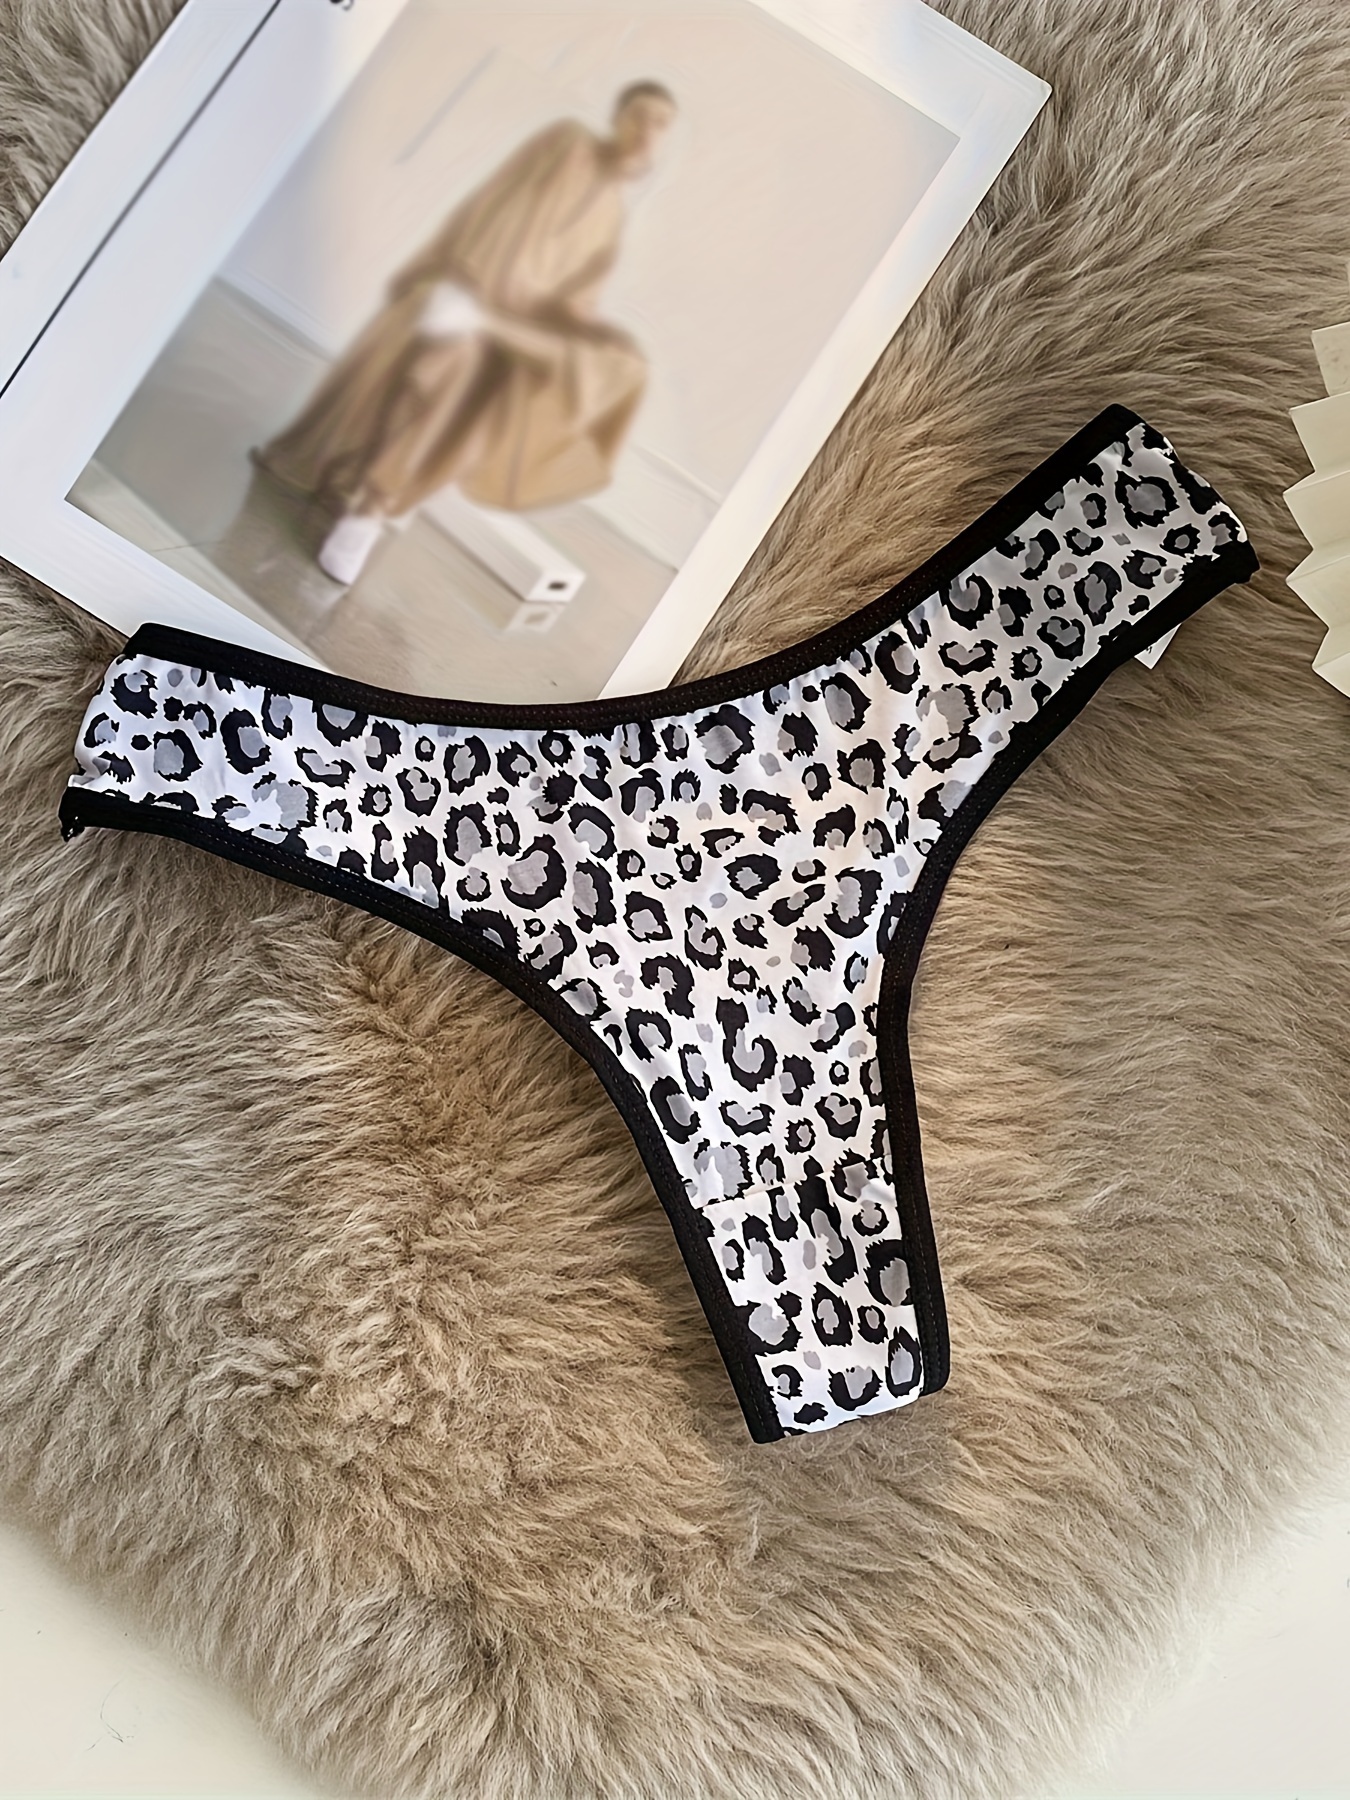 Luxury Designer LOVE Fitness Girl Seamless Panties With Lepord Zebra Print  Sexy Panties With Words For Ladies, Lingere Cotton Thongs For Female  Lingerie From Mayingclothes88, $13.51